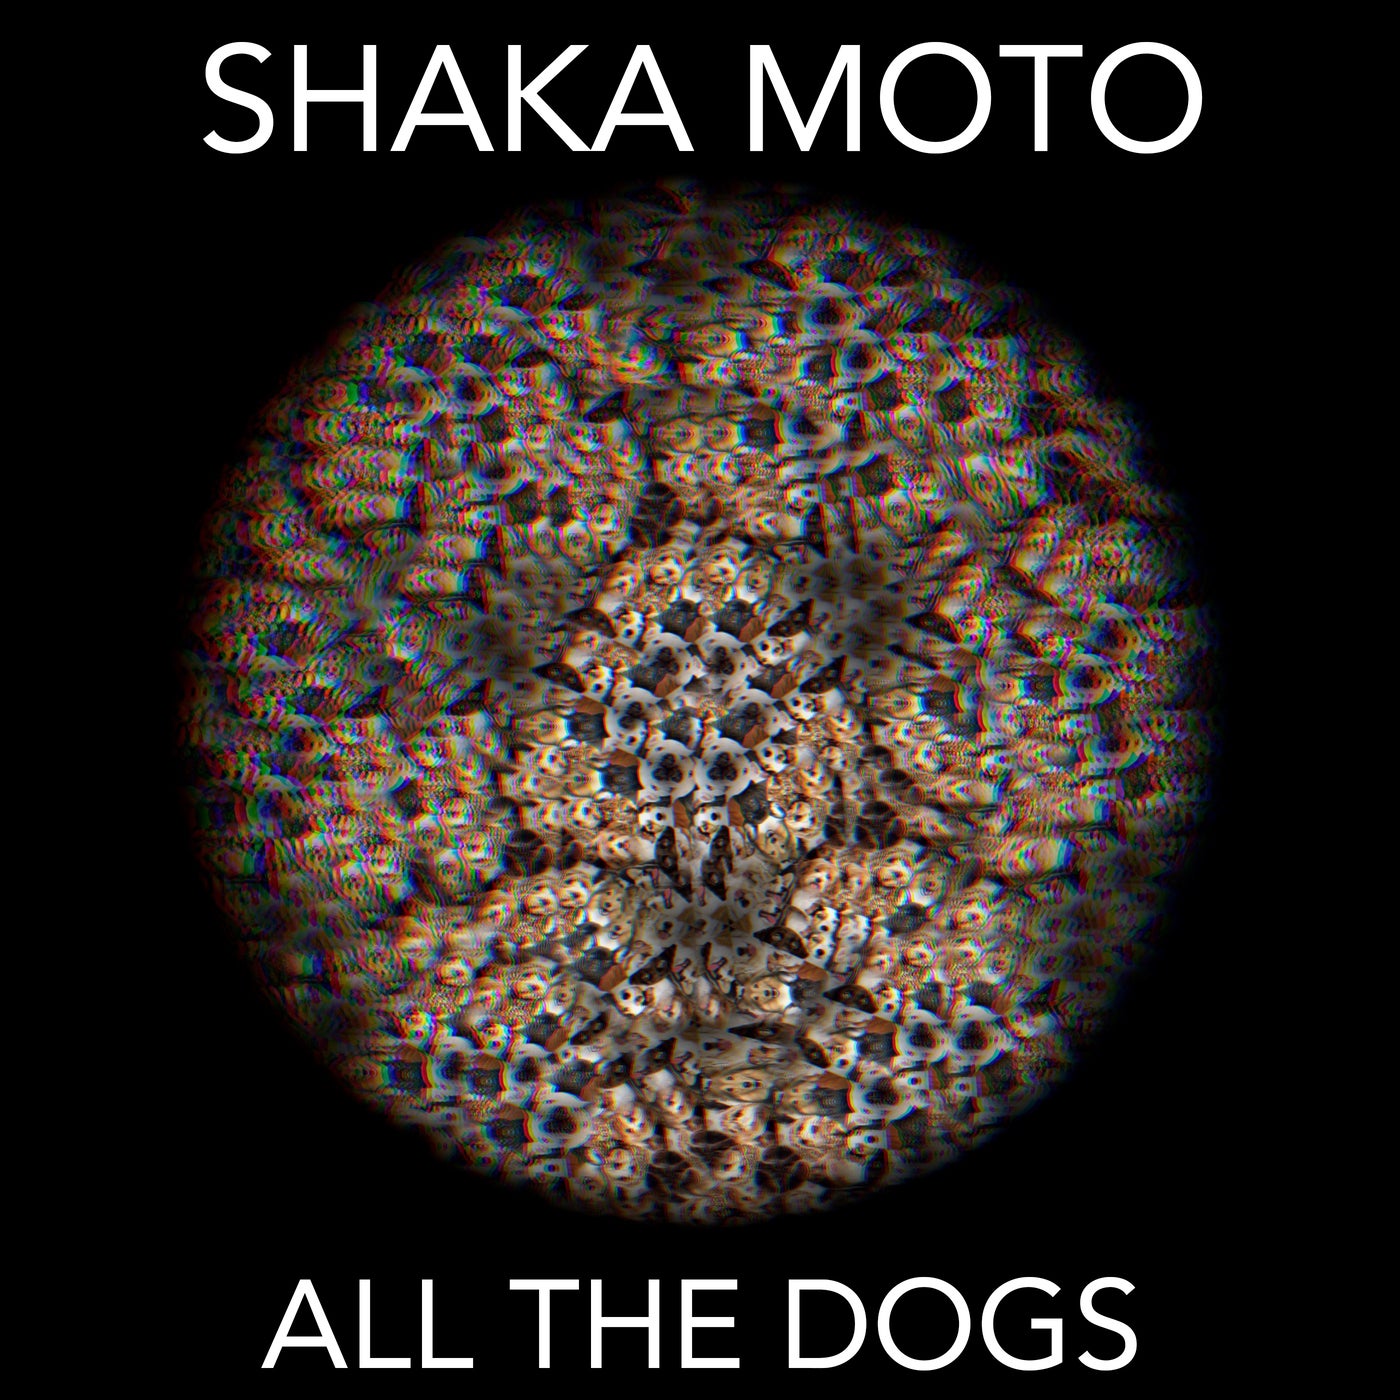 All the Dogs (Extended Edit)